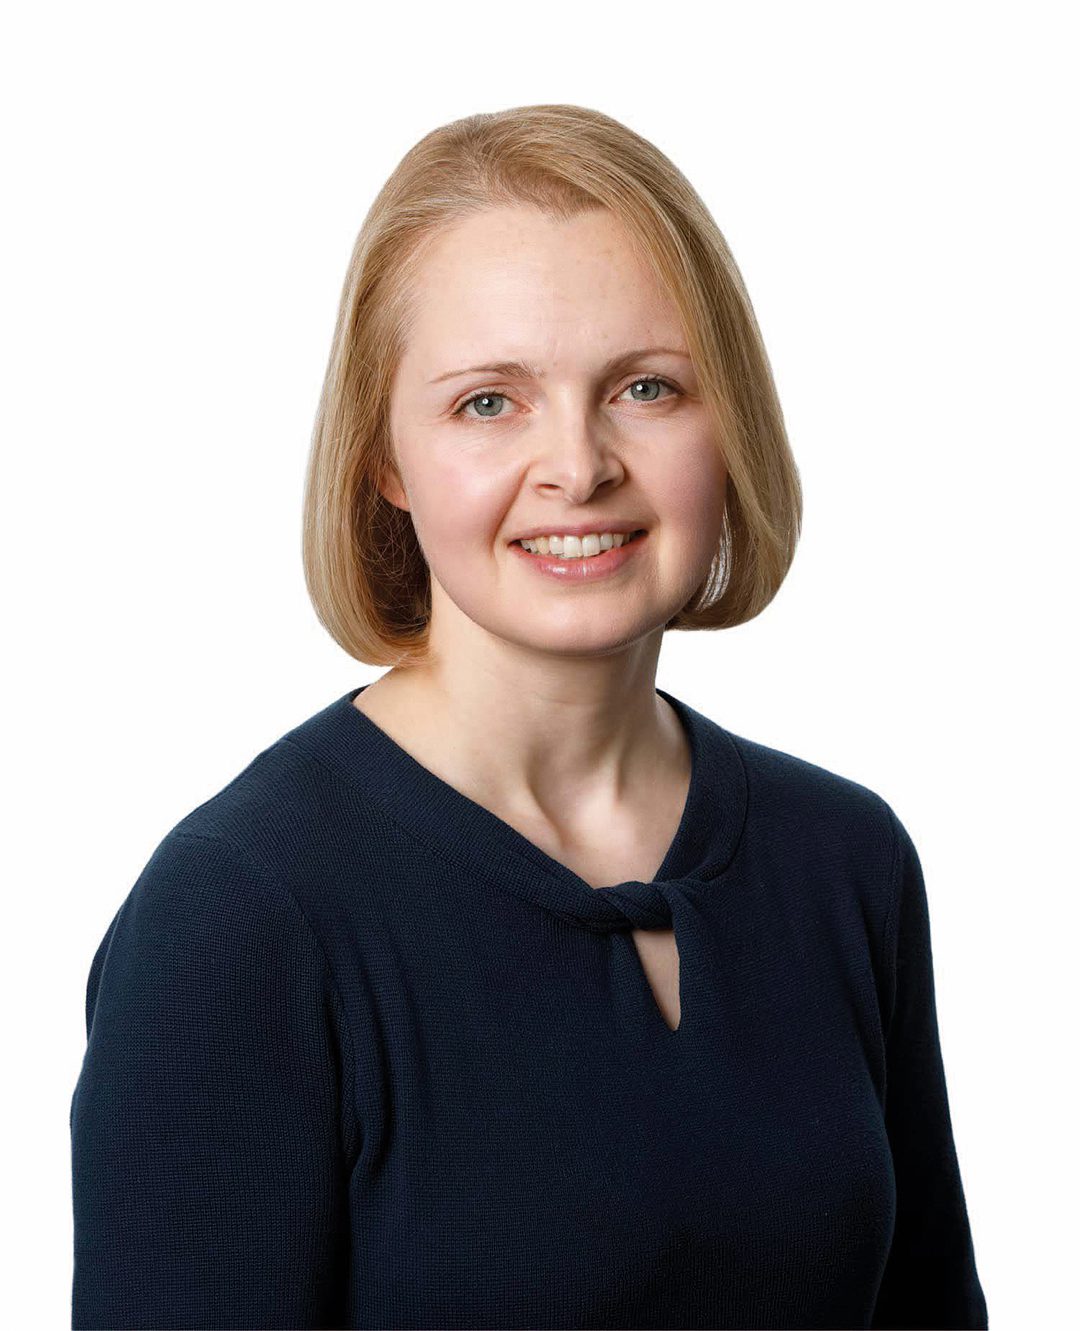 Laura Morrison is a managing practice development lawyer in the People, Reward and Mobility practice at Dentons UK and Middle East LLP, based in Scotland.